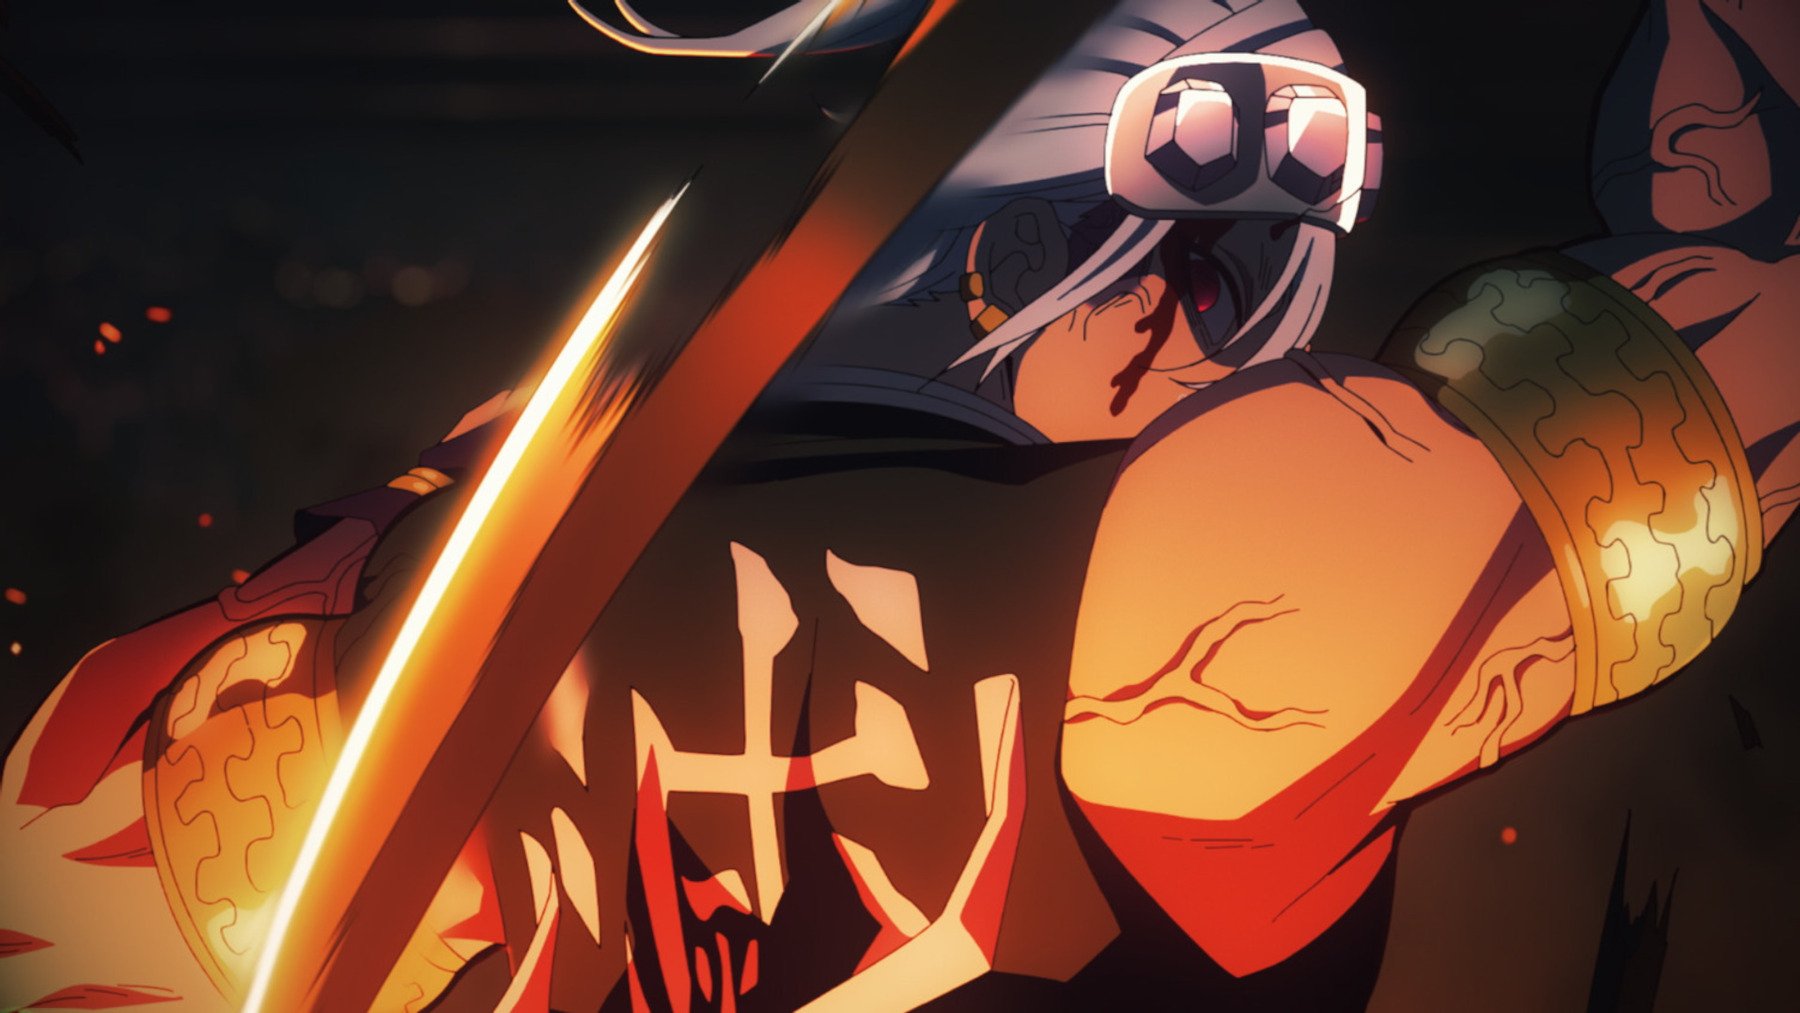 Sound Hashira Tengen Uzui holding a blade in 'Demon Slayer' Season 2. The image shows him from behind, and he has blood pouring down his face.